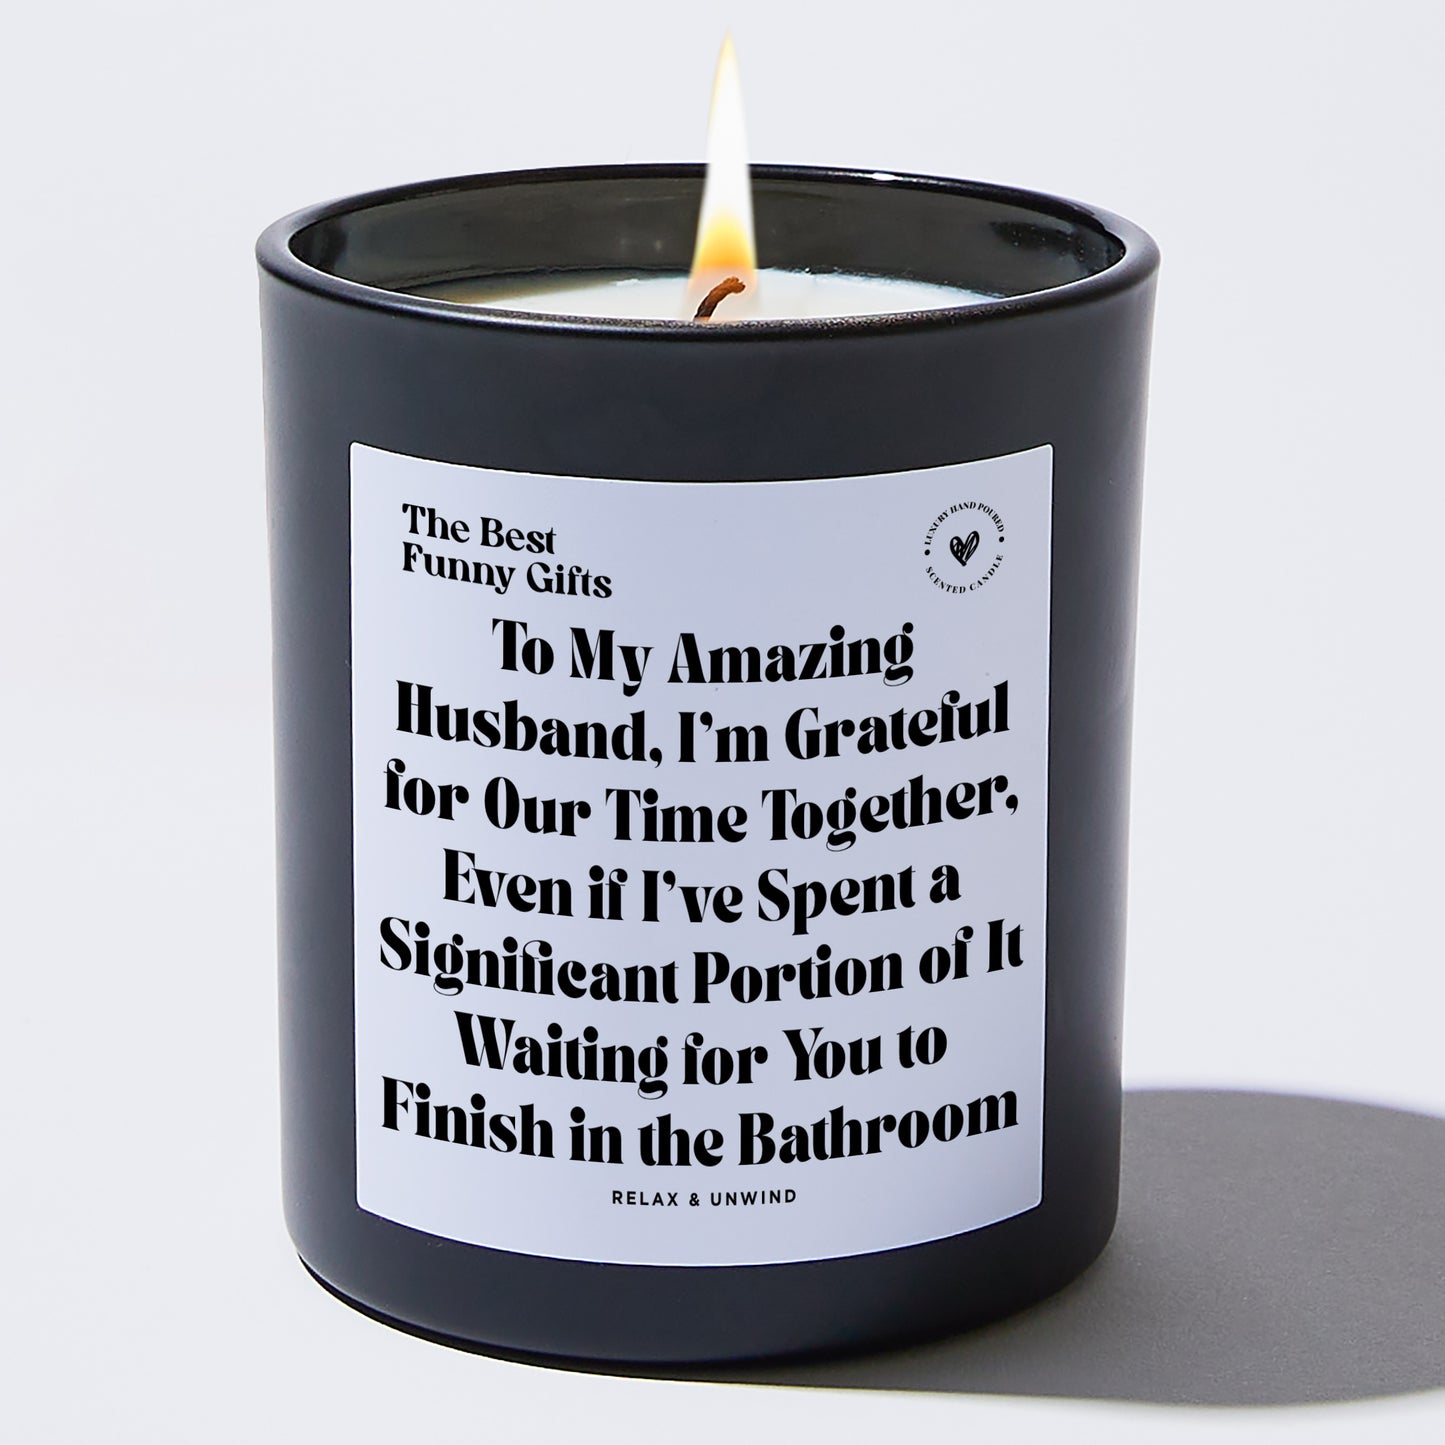 Anniversary To My Amazing Husband, I'm Grateful for Our Time Together, Even if I've Spent a Significant Portion of It Waiting for You to Finish in the Bathroom - The Best Funny Gifts